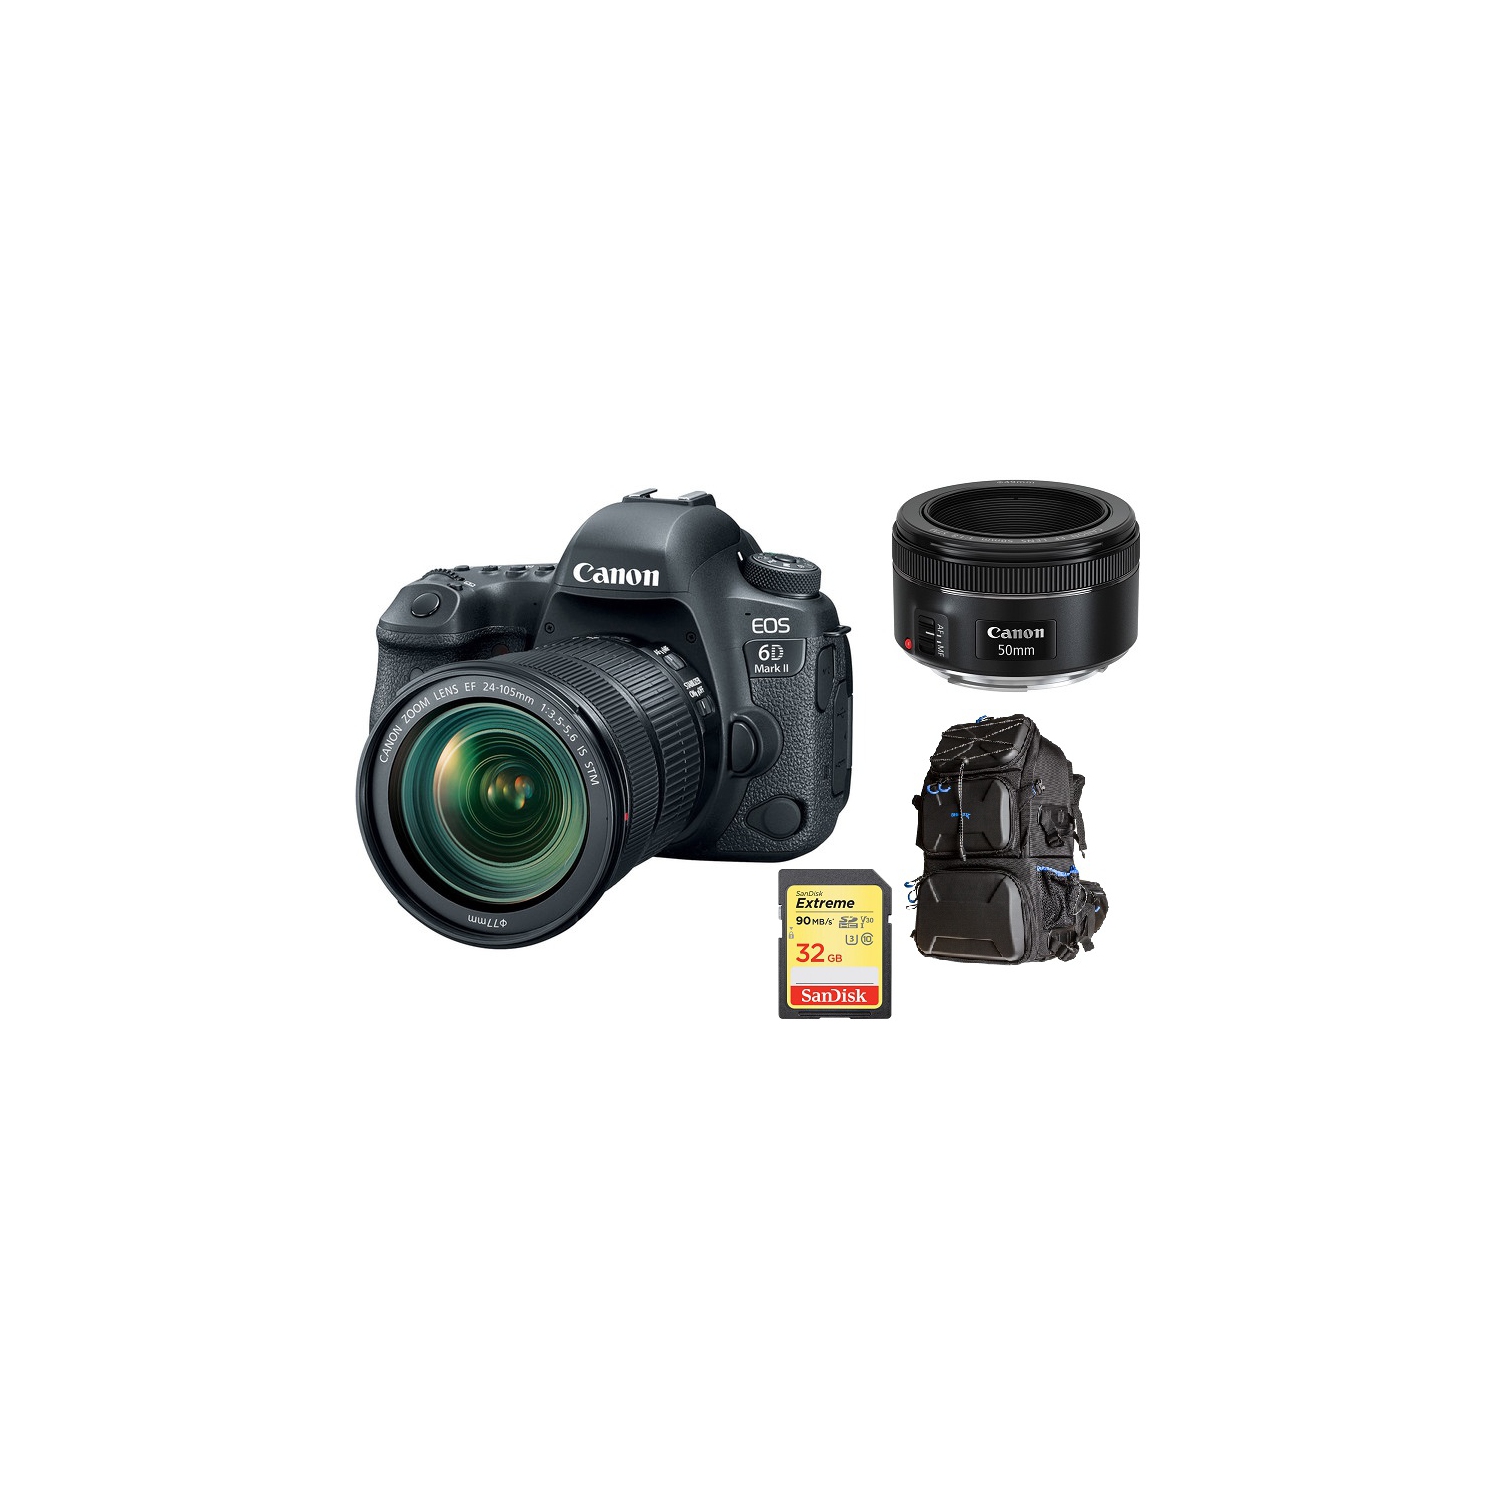 Canon 6D Mark II with 24-105mm Stm Lens with Canon 50mm STM Lens Bundle International Version w/Seller Provided Warranty